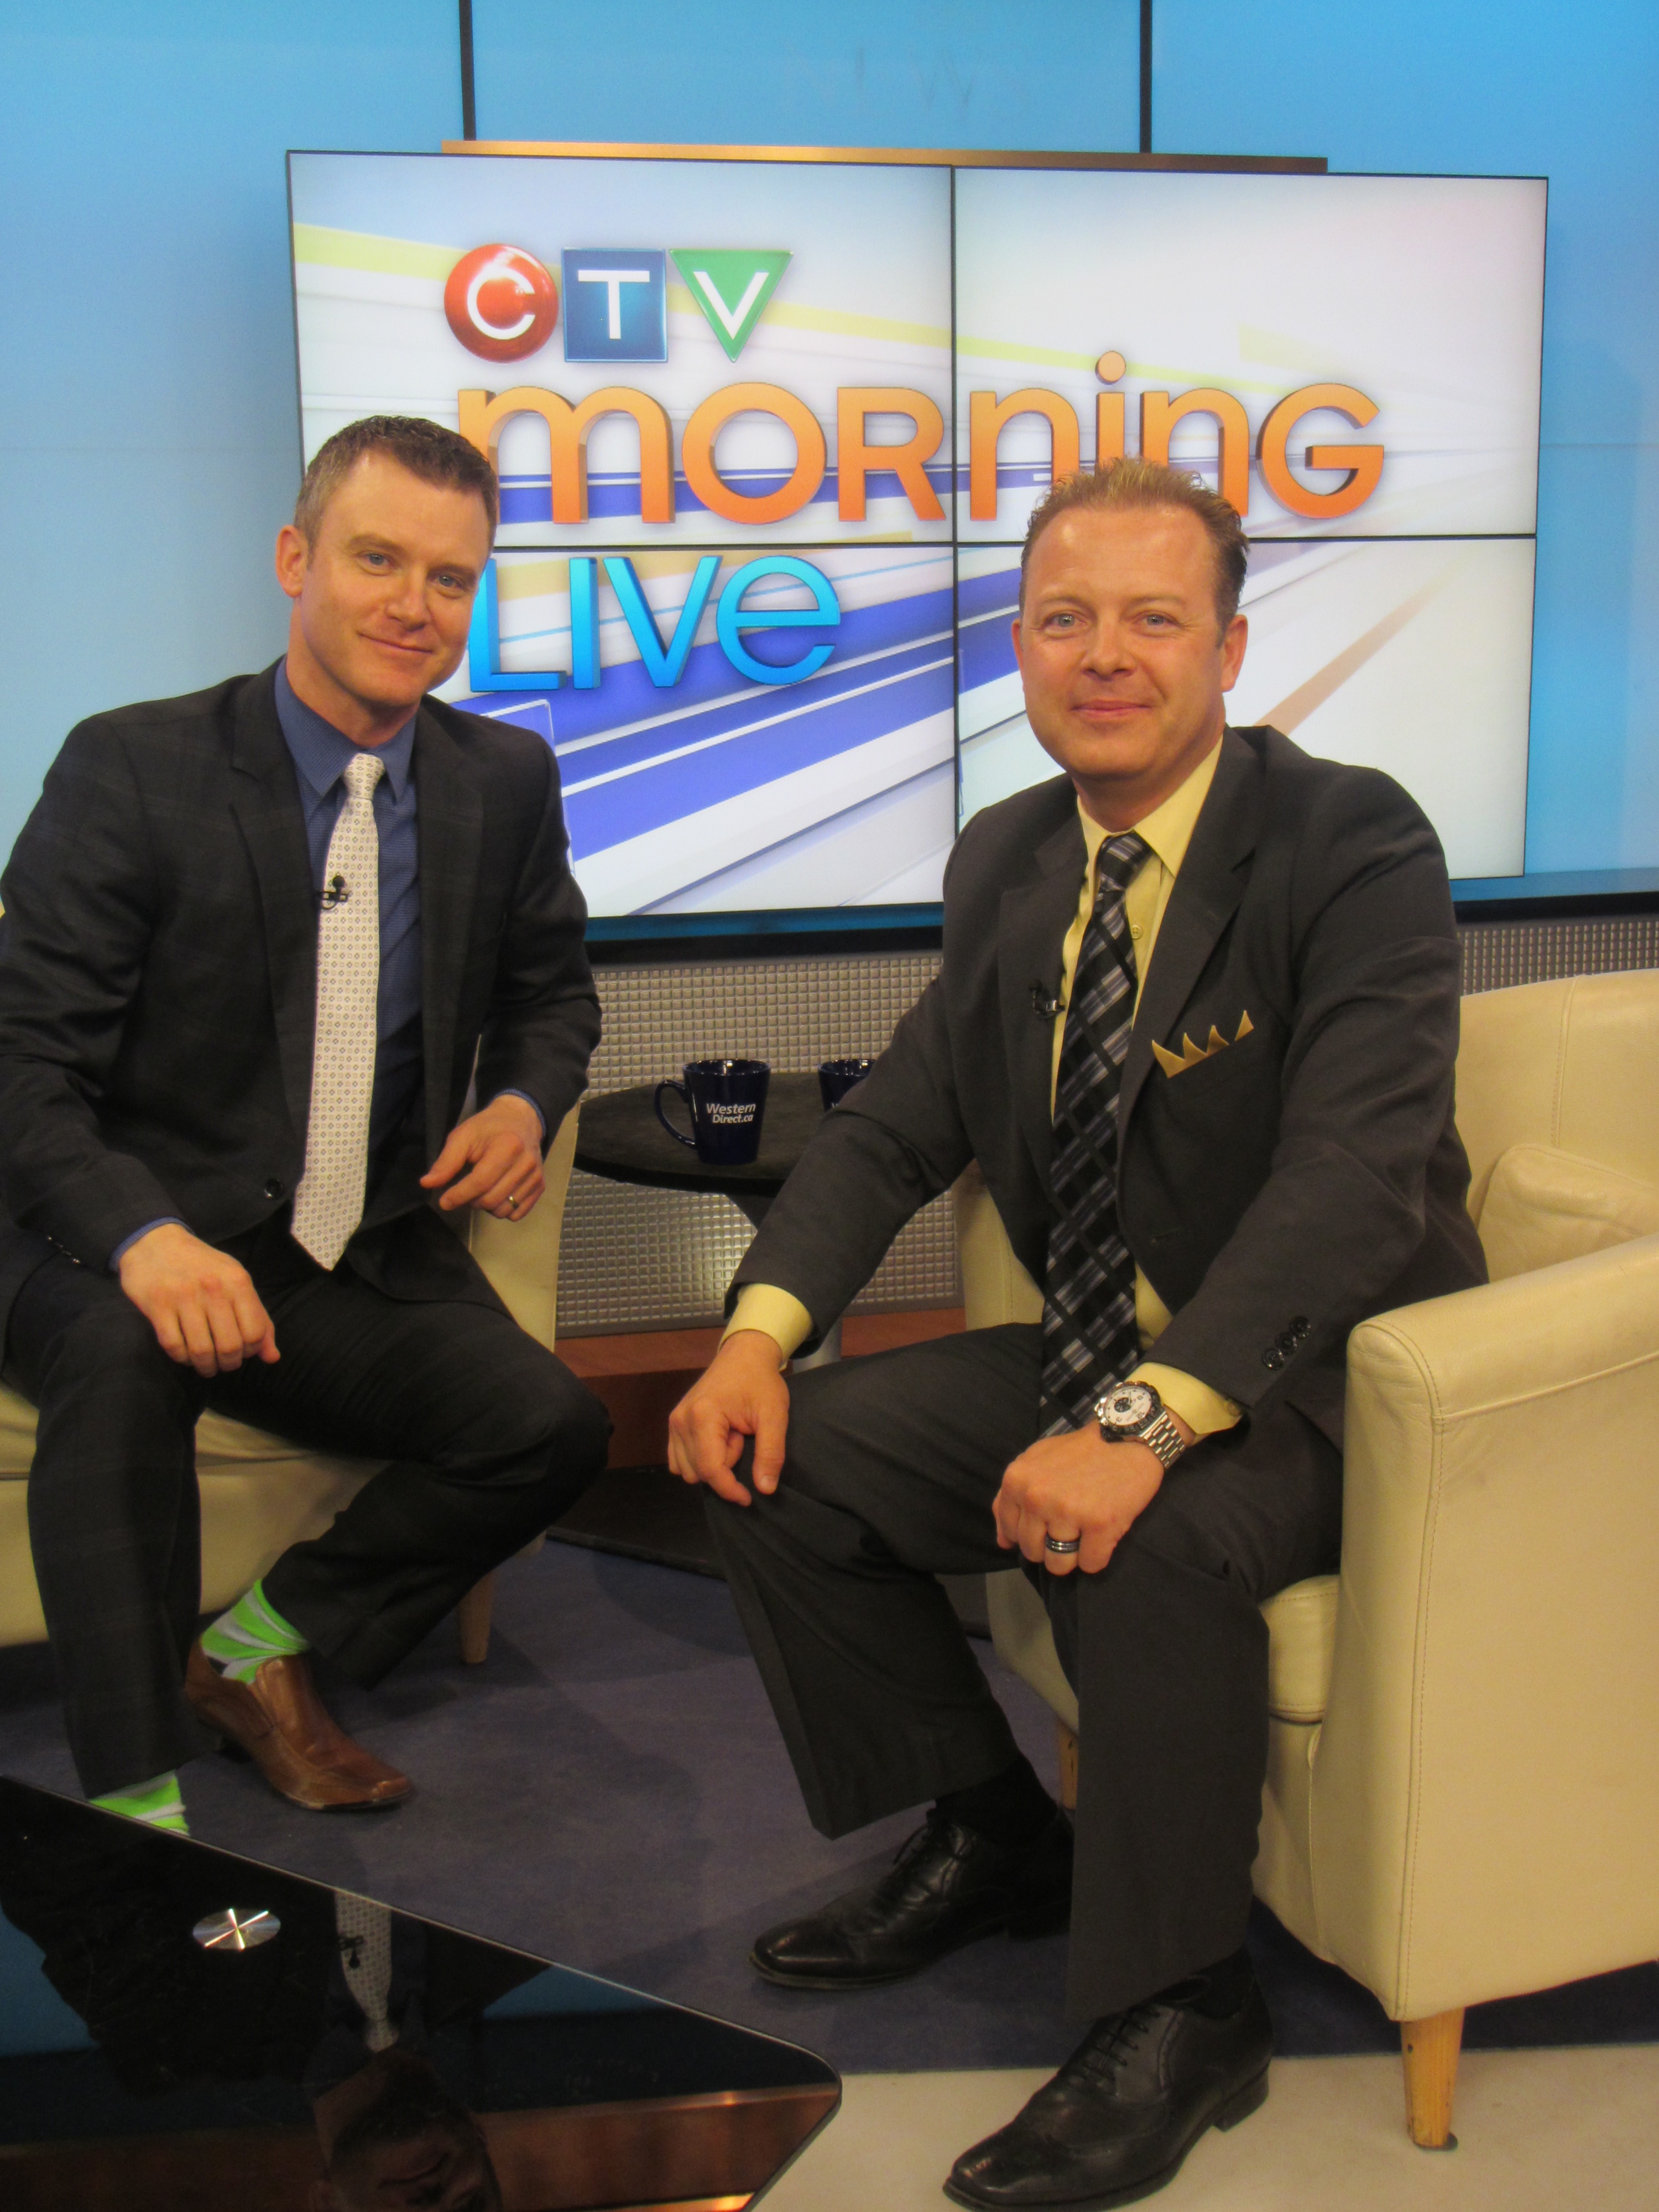 On CTV Morning Live promoting The Gratitude Experiment